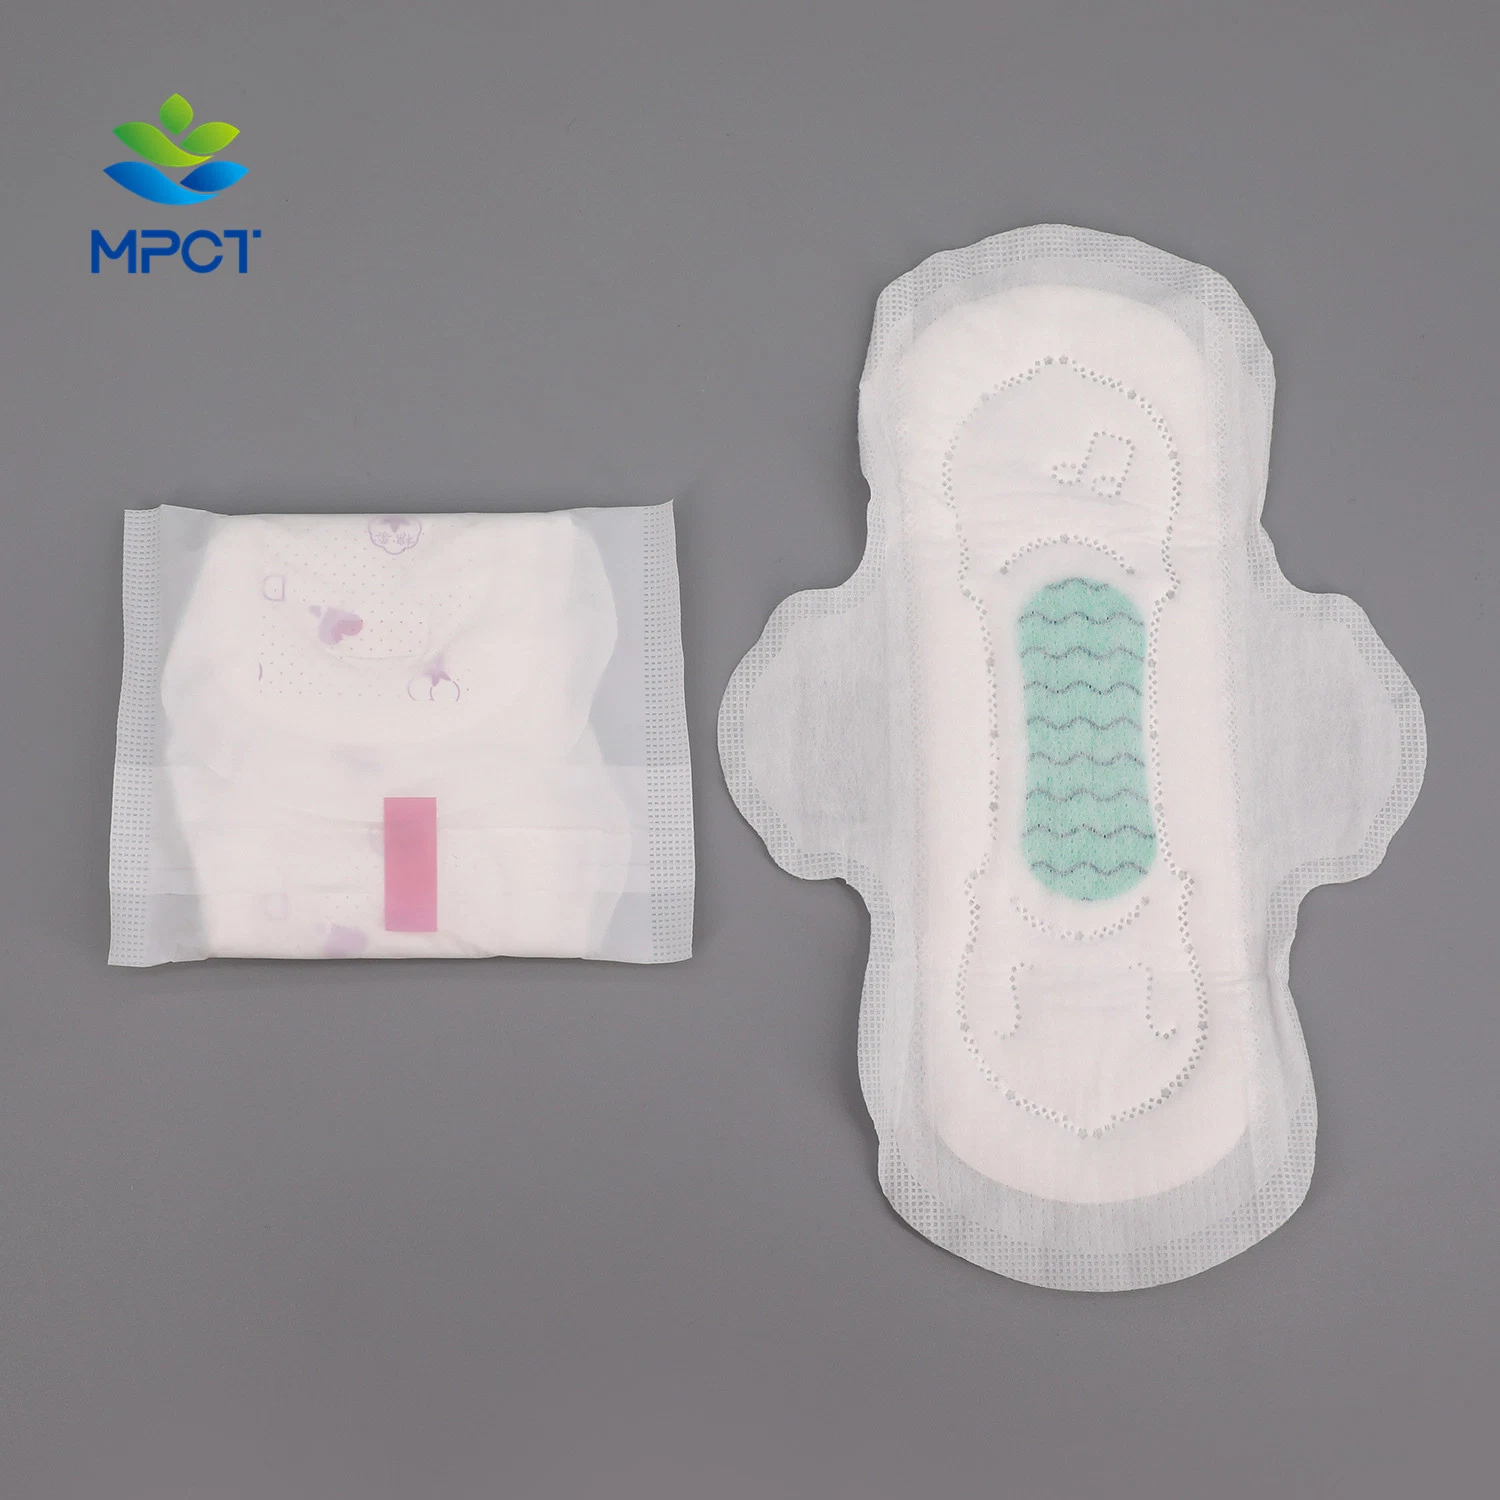 Comfortable Sanitary Napkins with Good Pads with Wings/Soft Non Woven Fabric/Release Paper with Superior Quality